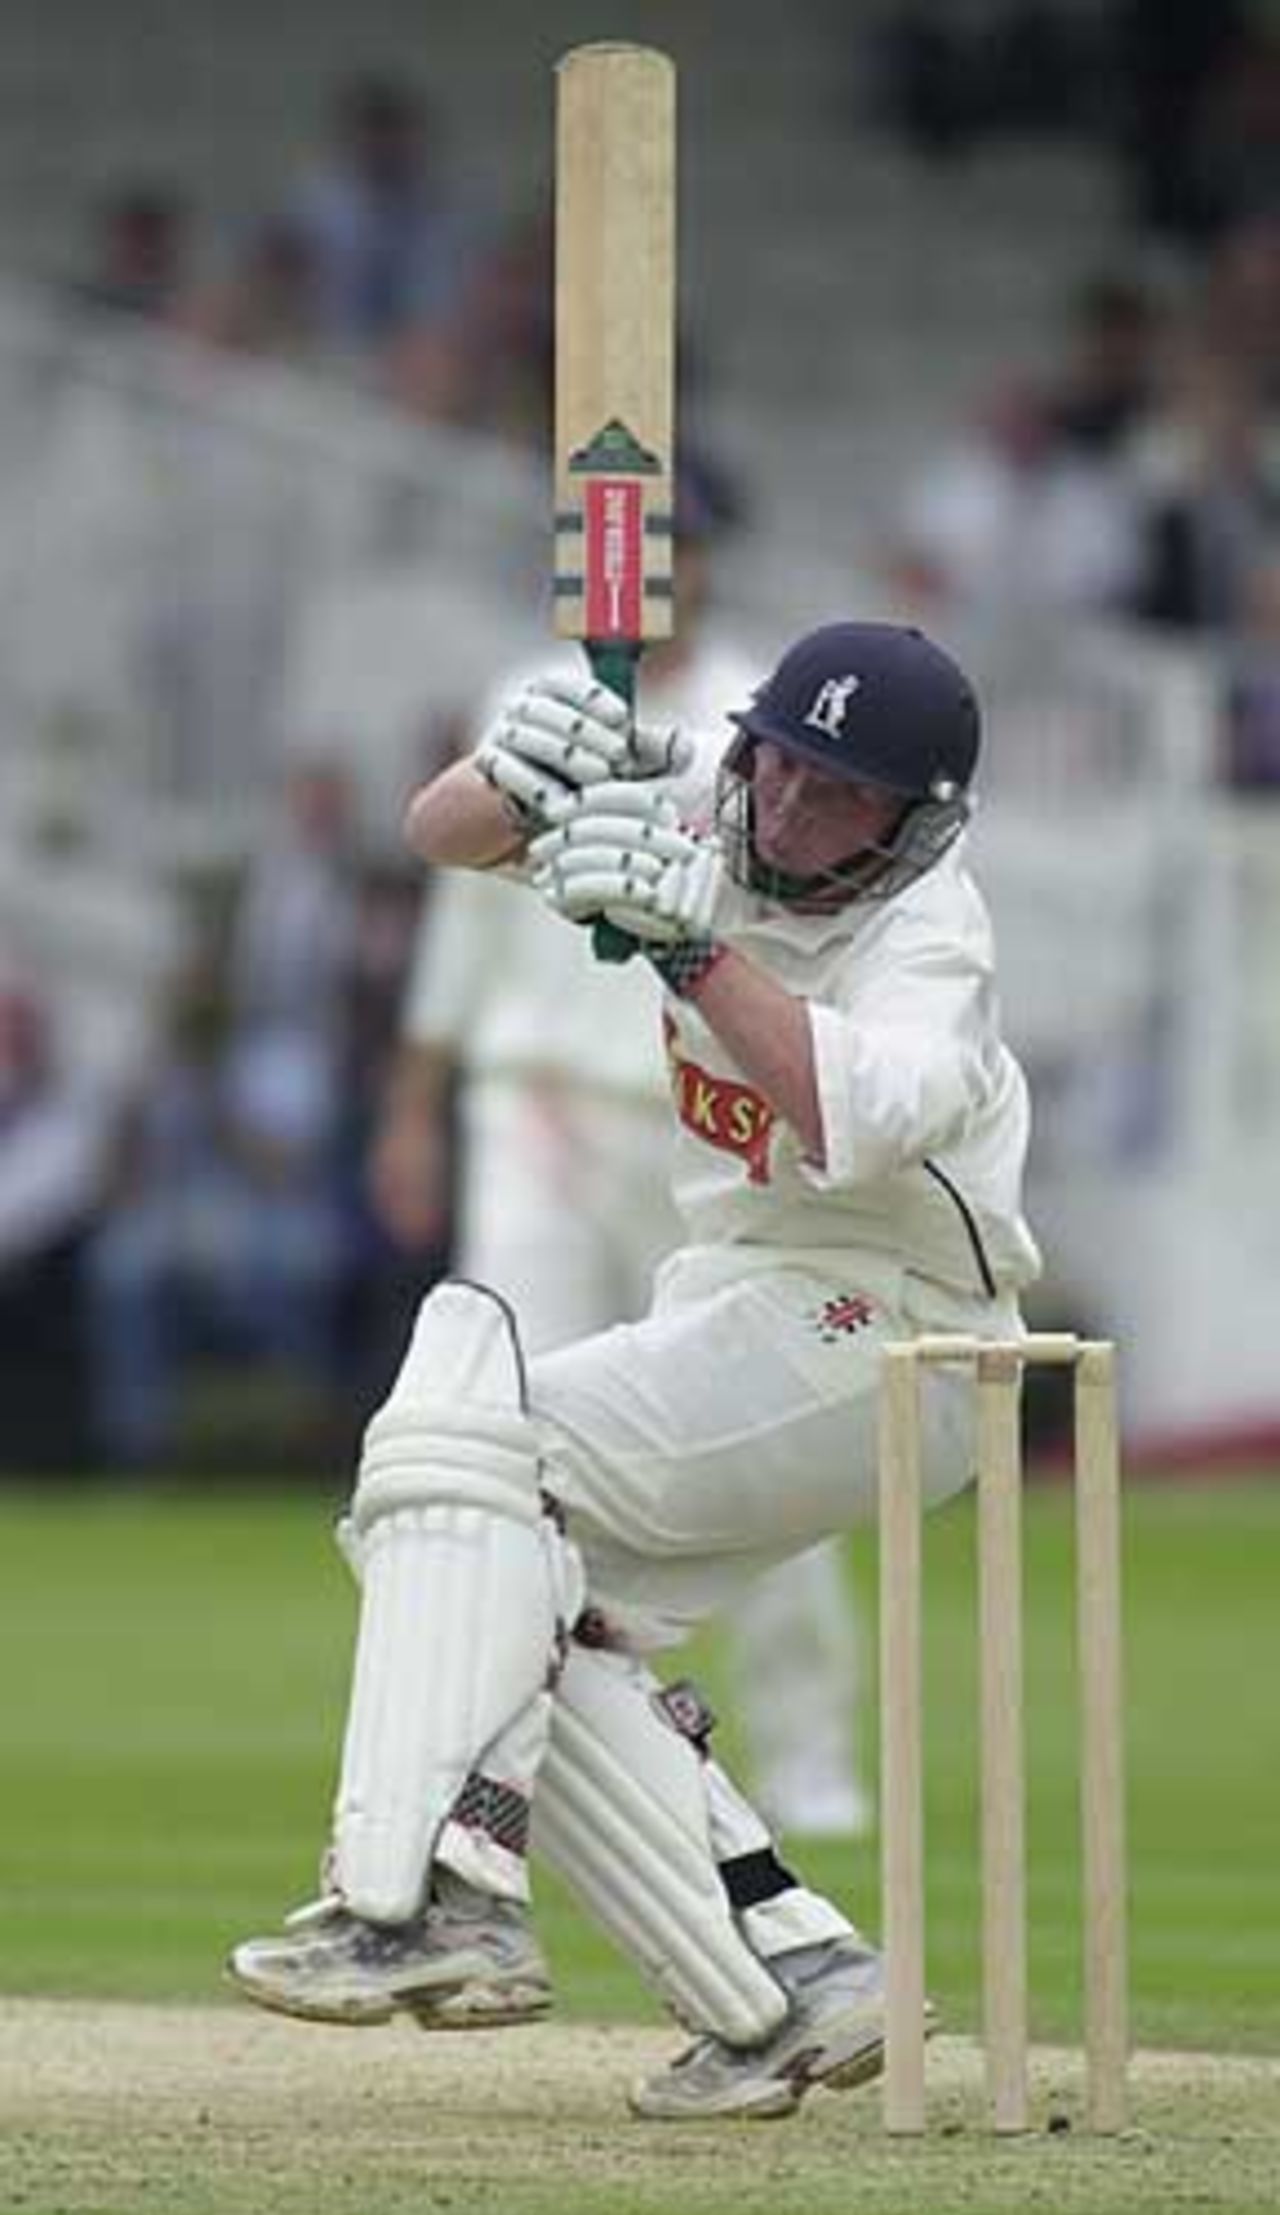 Man of the Match Ian Bell at the crease, Benson and Hedges Cup Final, Essex v Warwickshire, Lord's, 22 June 2002